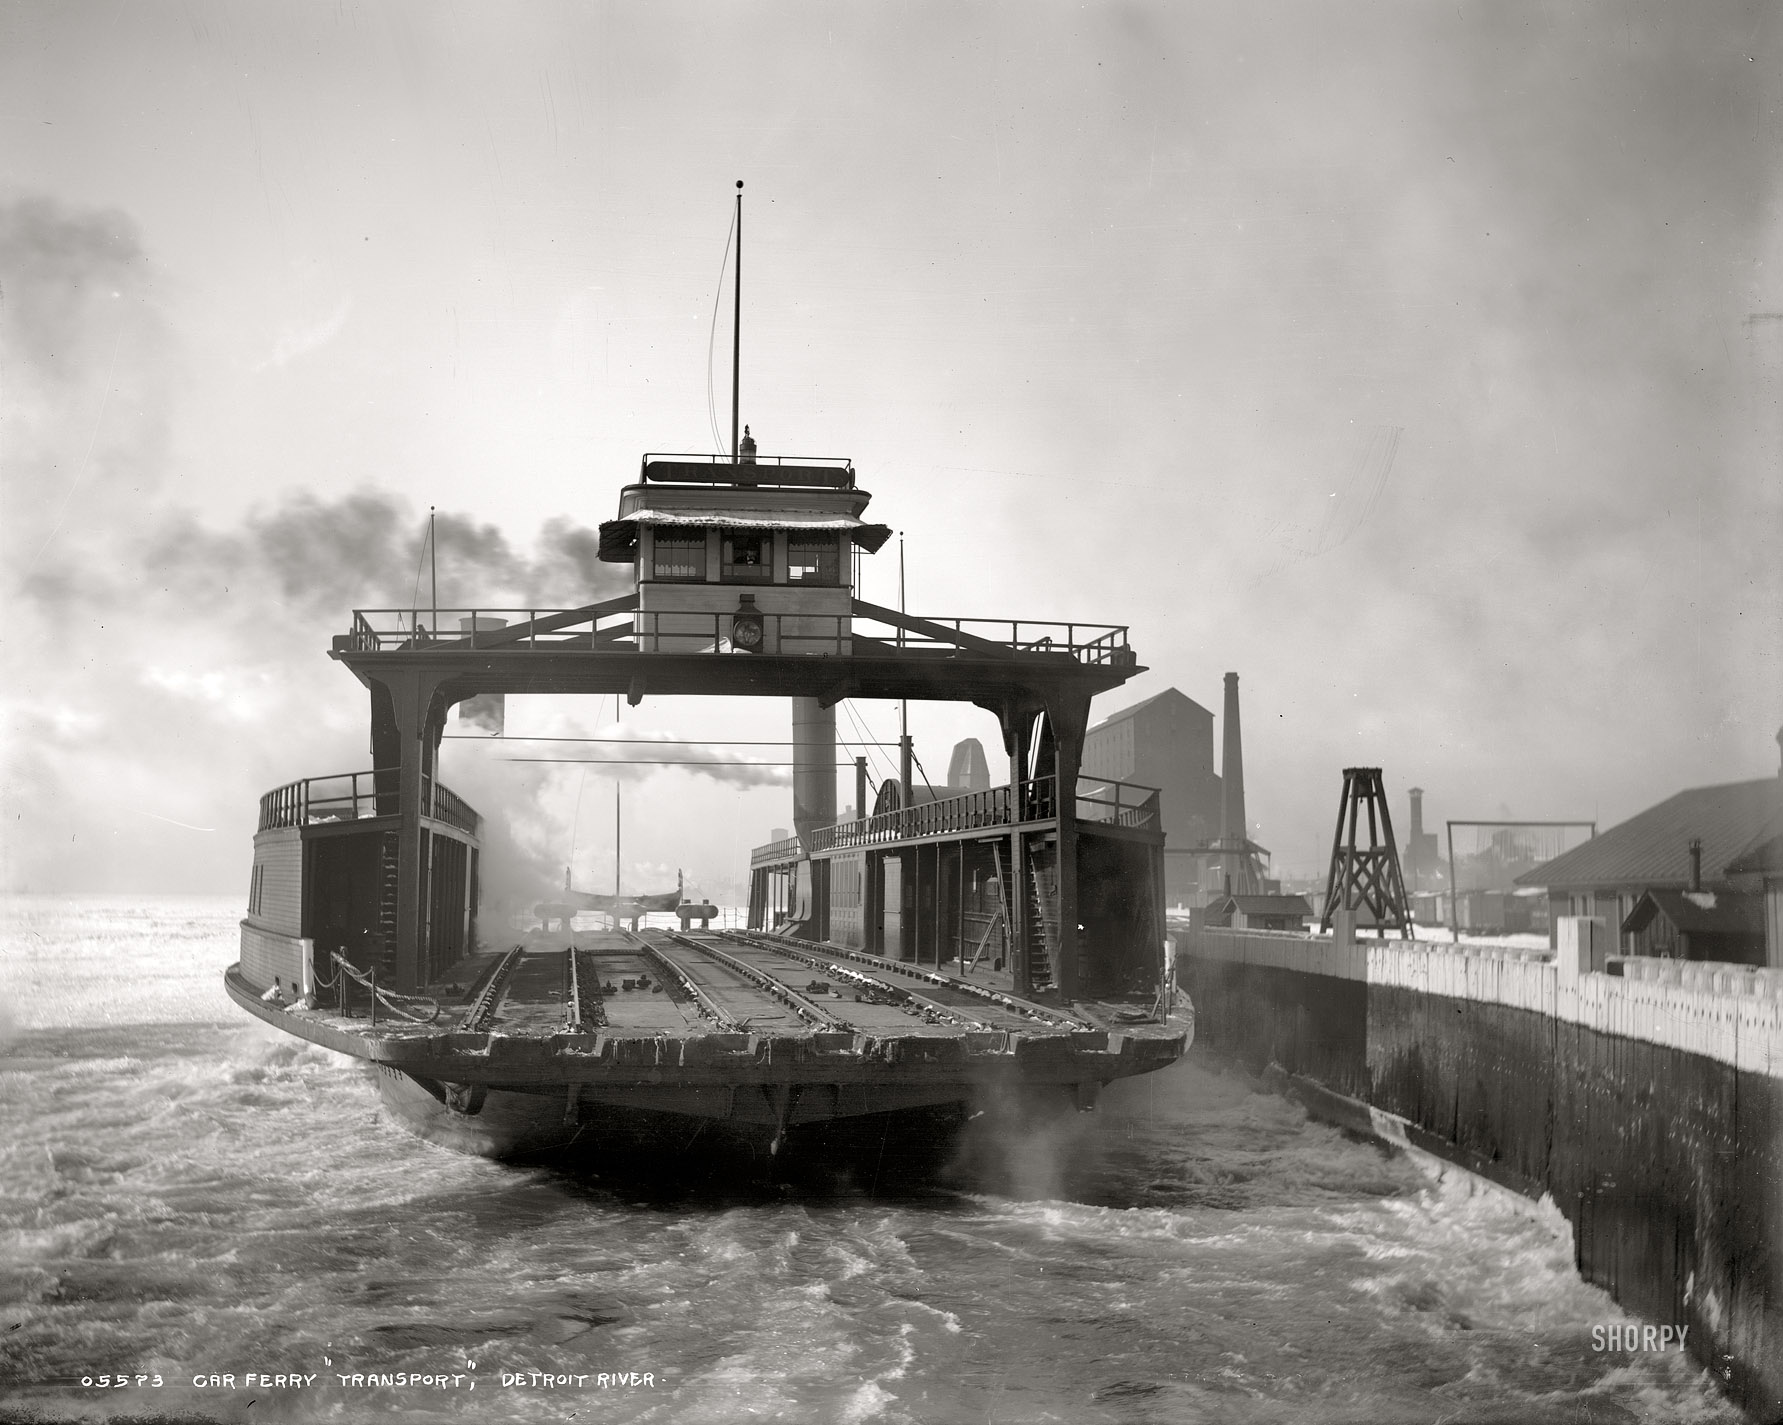 Circa 1900. "Car ferry 'Transport' entering slip, Detroit River." Railcar steamer on an icy, windy day. Detroit Publishing Company glass negative. View full size.